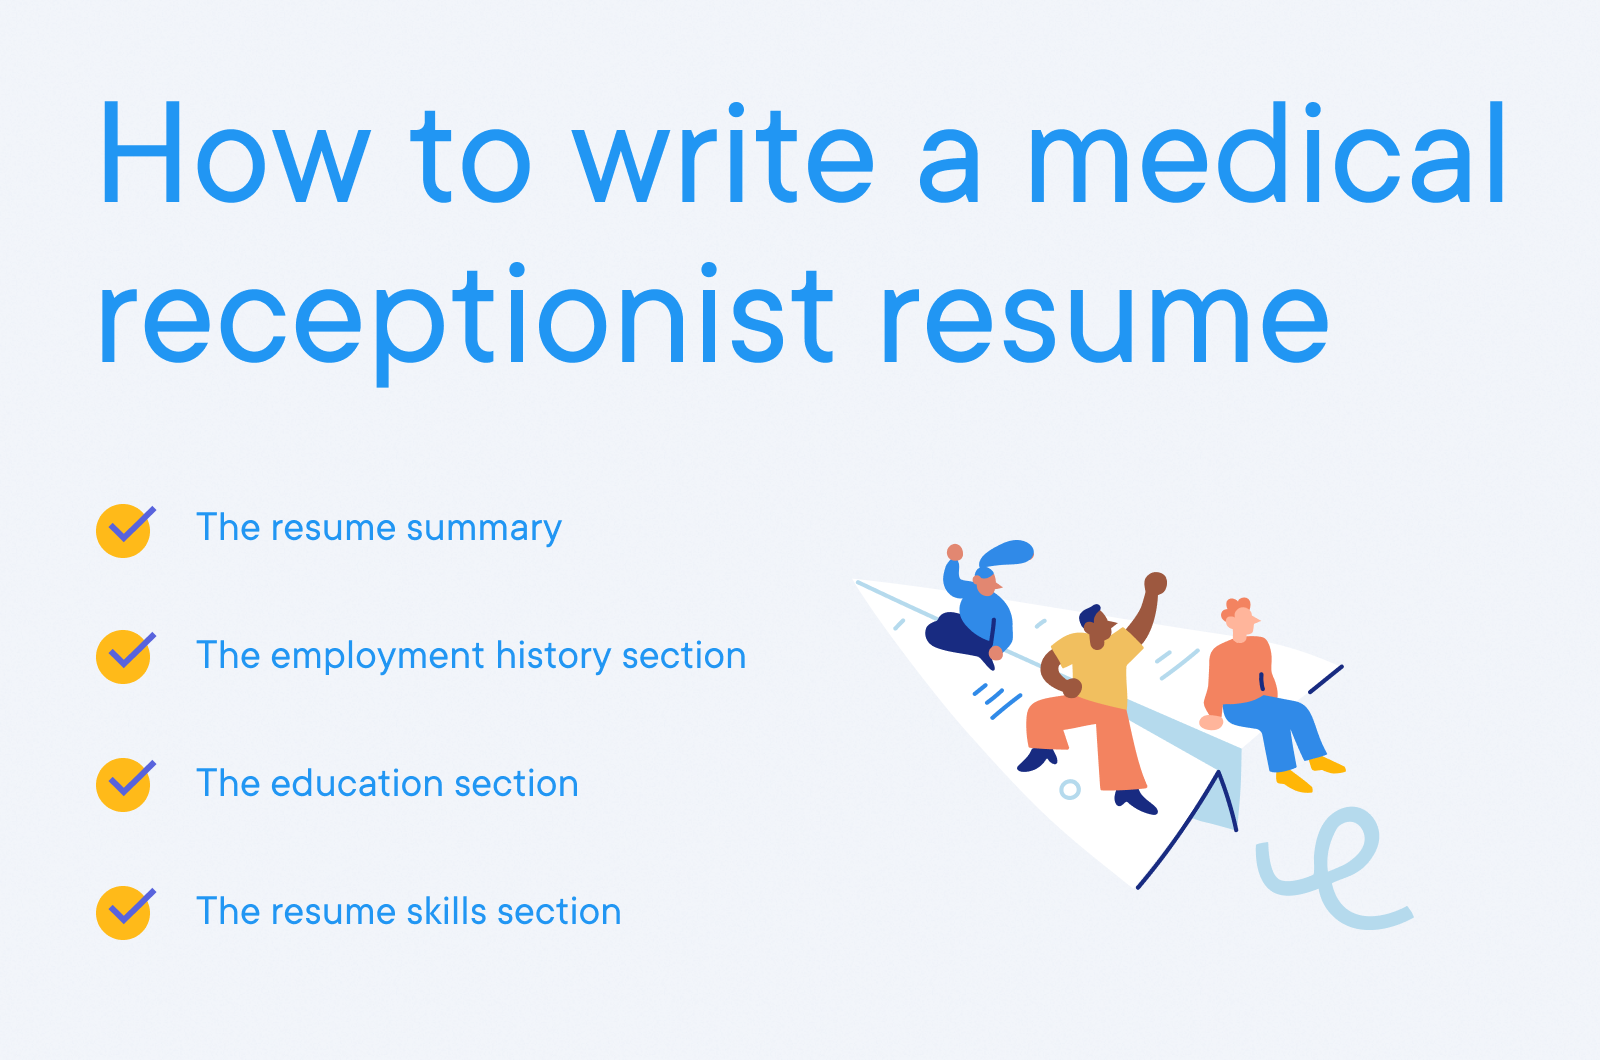 Medical Receptionist - How to write a medical receptionist resume